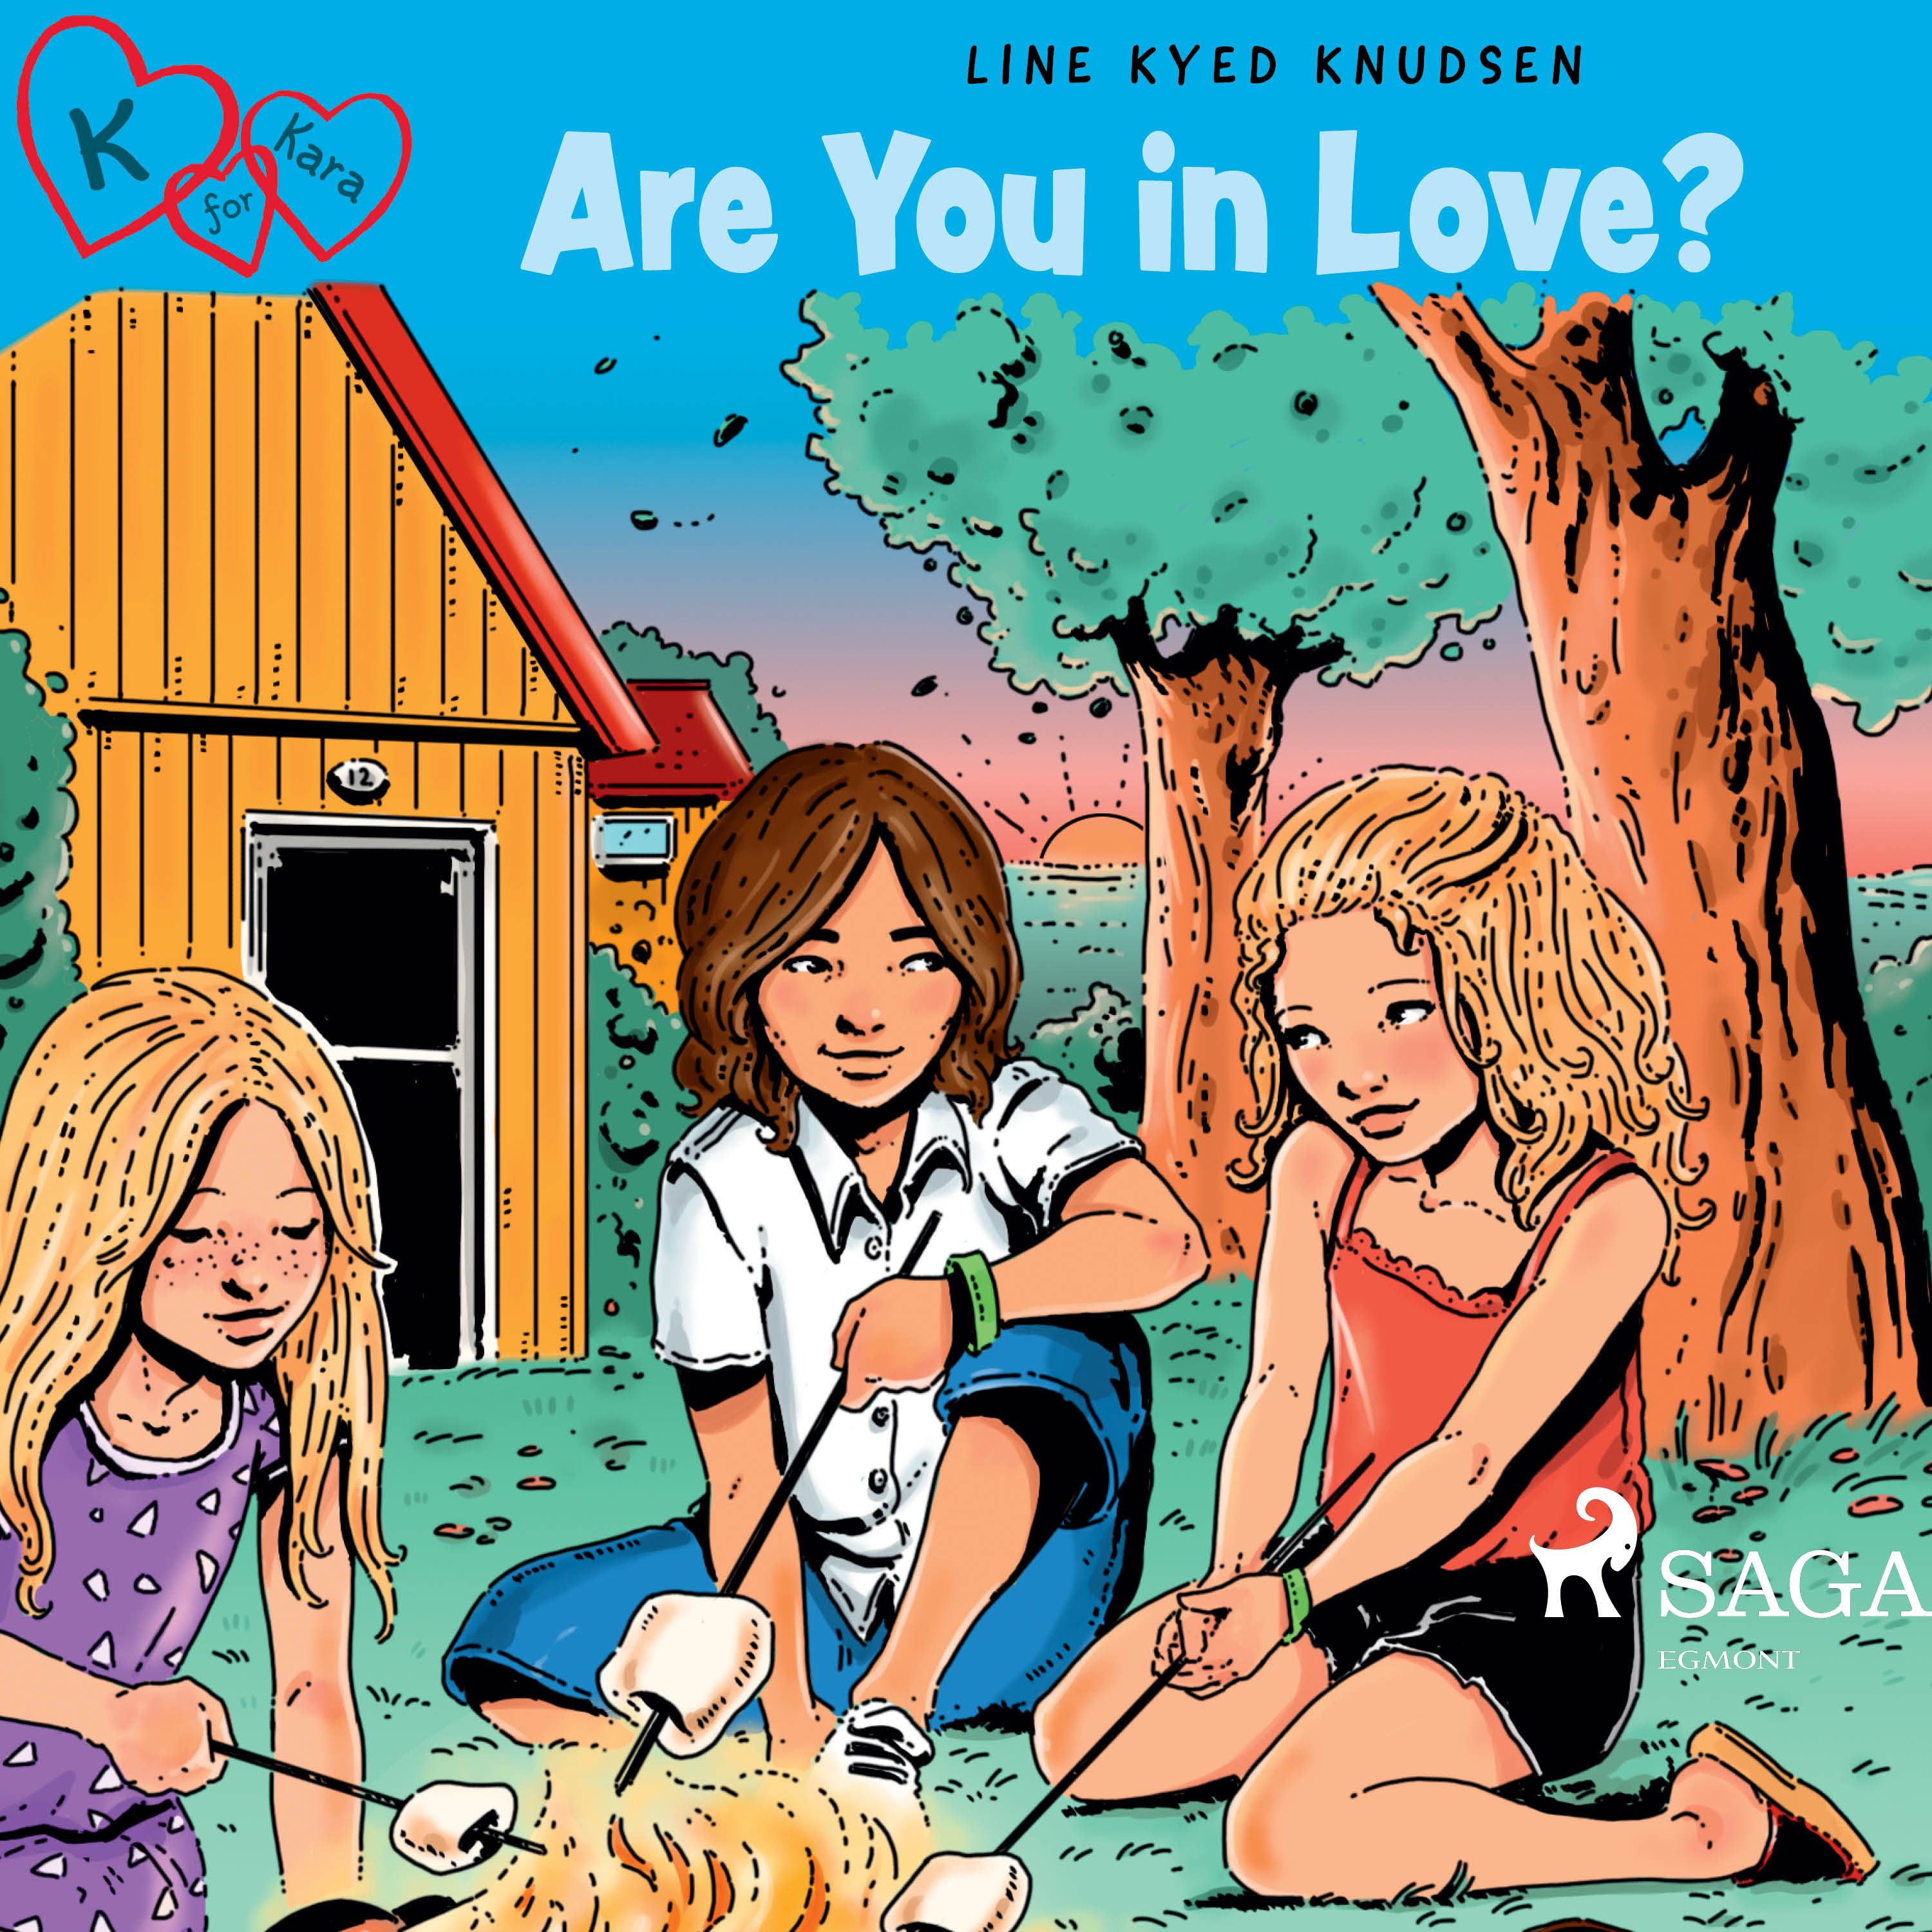 K for Kara 19 - Are You in Love?, audiobook by Line Kyed Knudsen